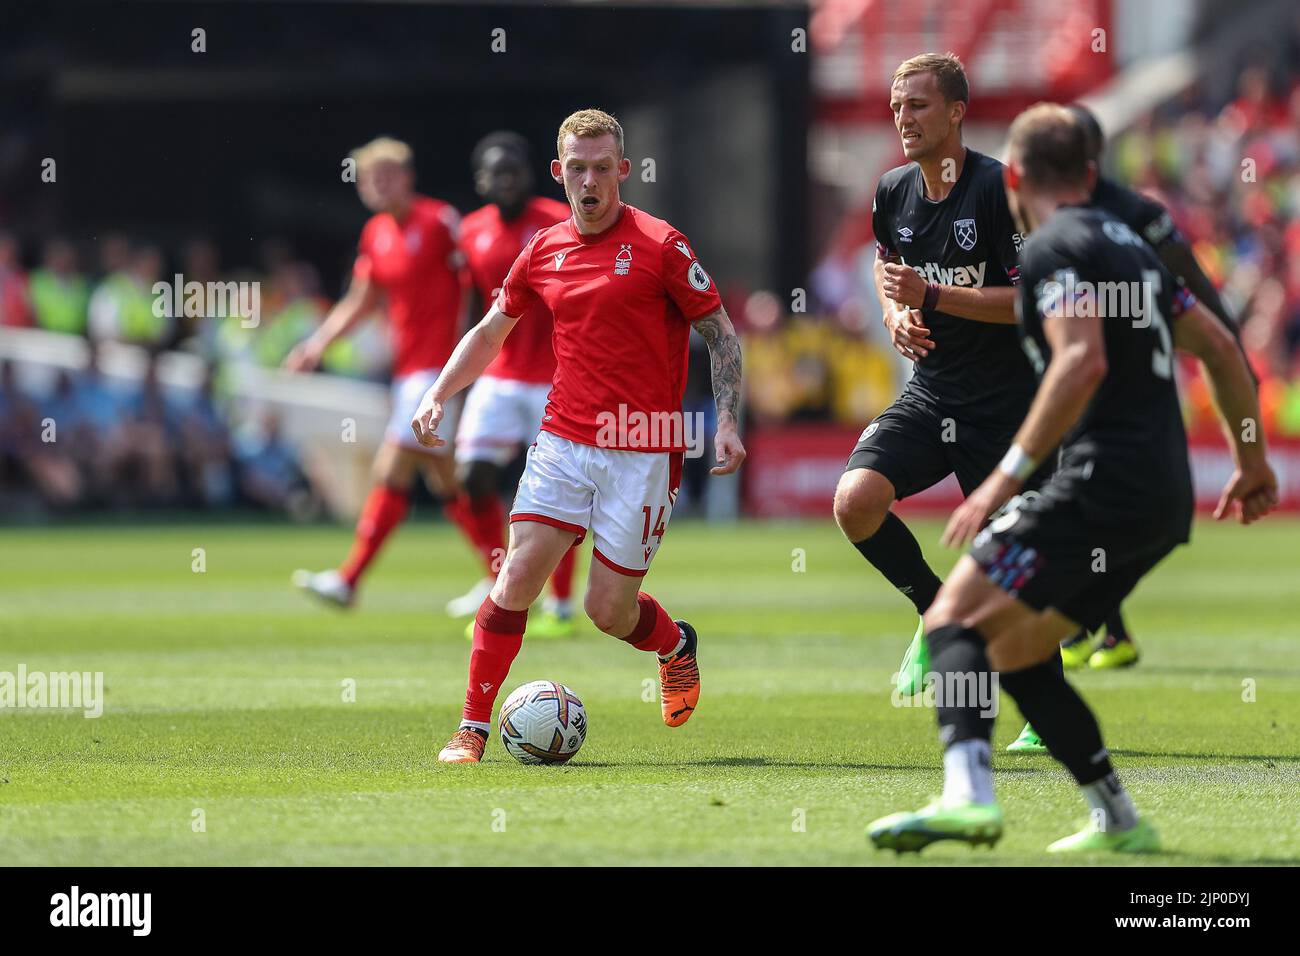 Lewis O'Brien #14 of Nottingham Forest runs with the ball Stock Photo